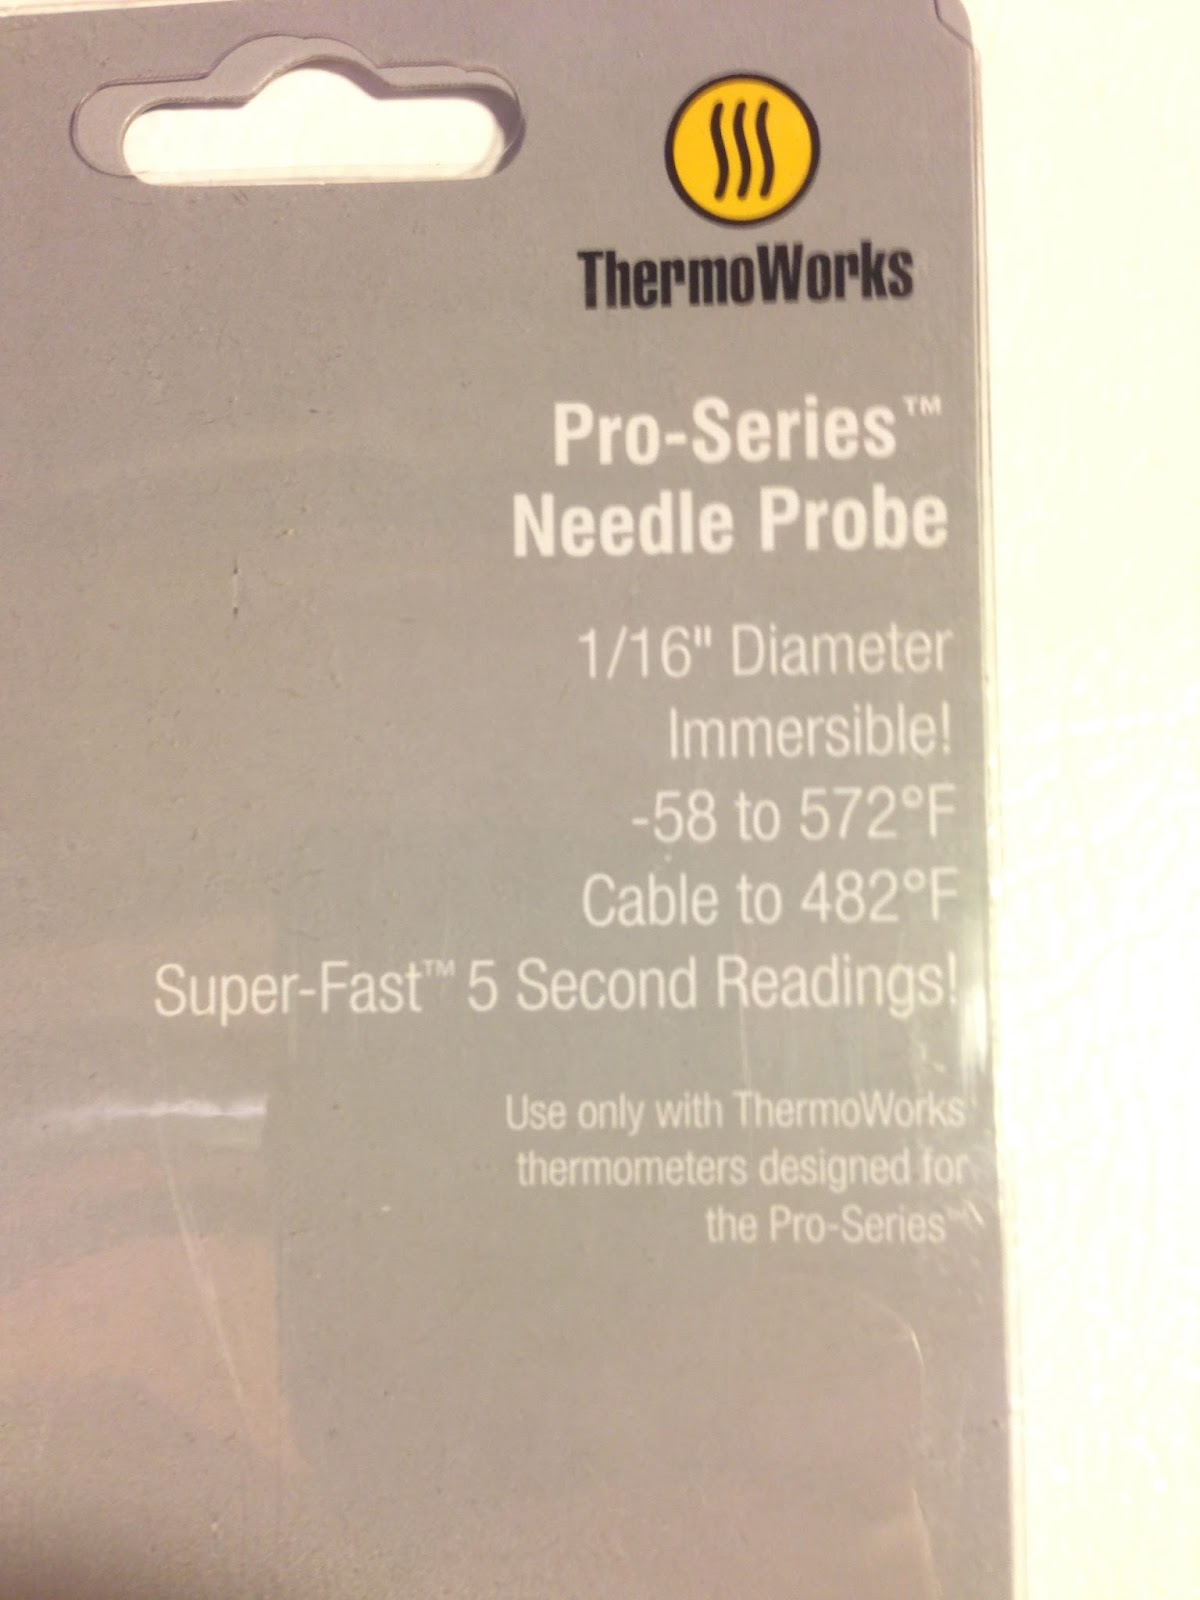 Review of ThermoWorks ChefAlarm : r/Homebrewing